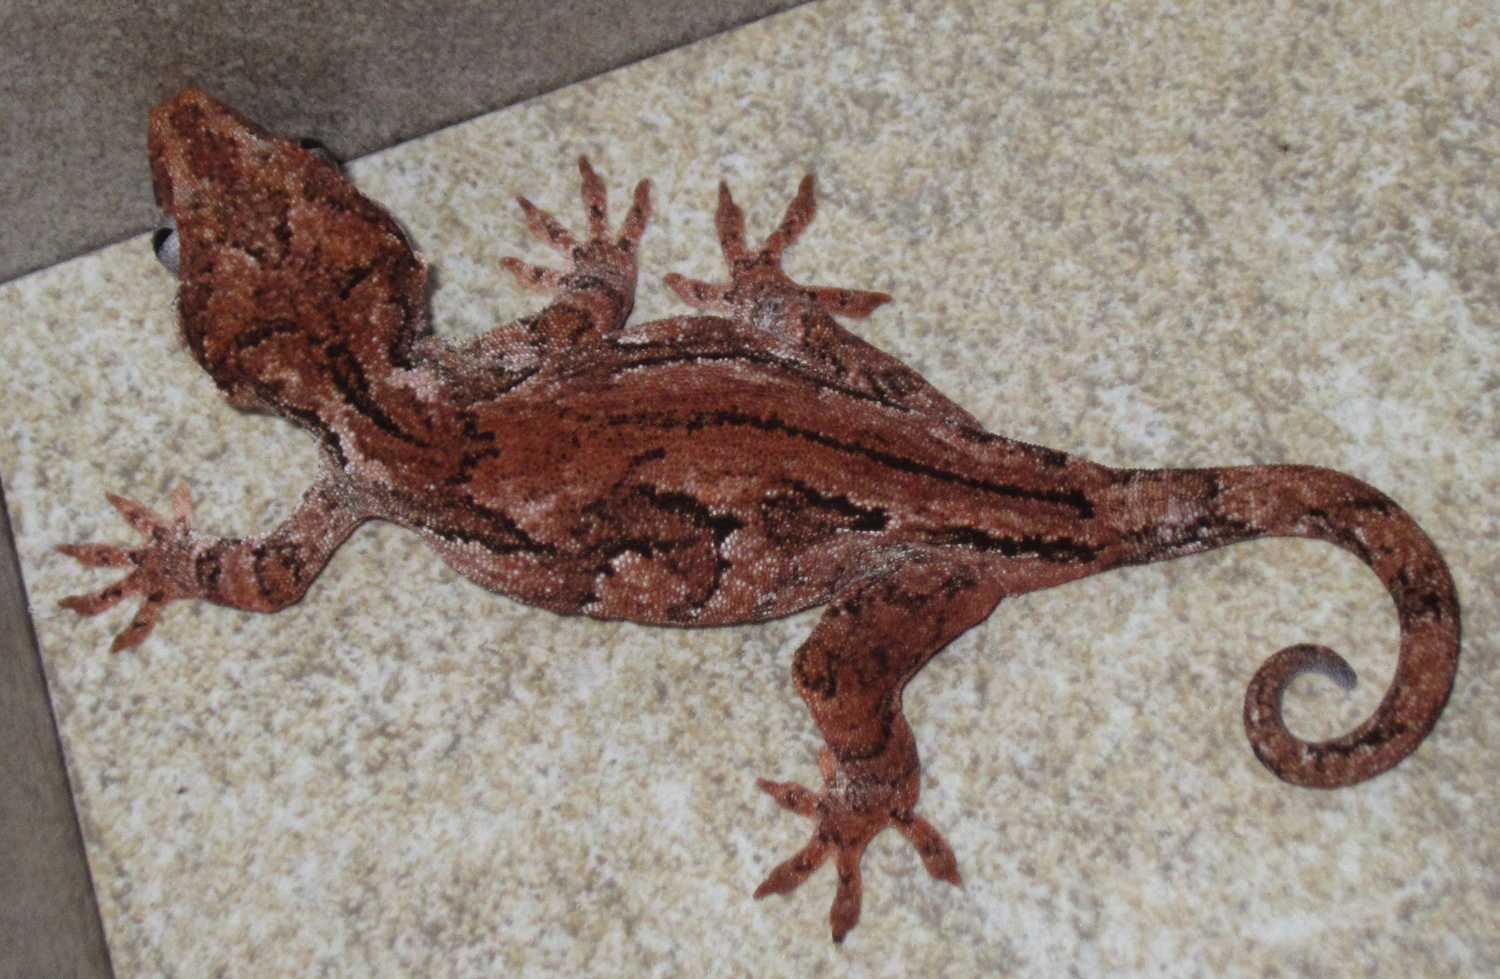 Red Based Mosaic Gargoyle Gecko by Appalachian Ectotherms